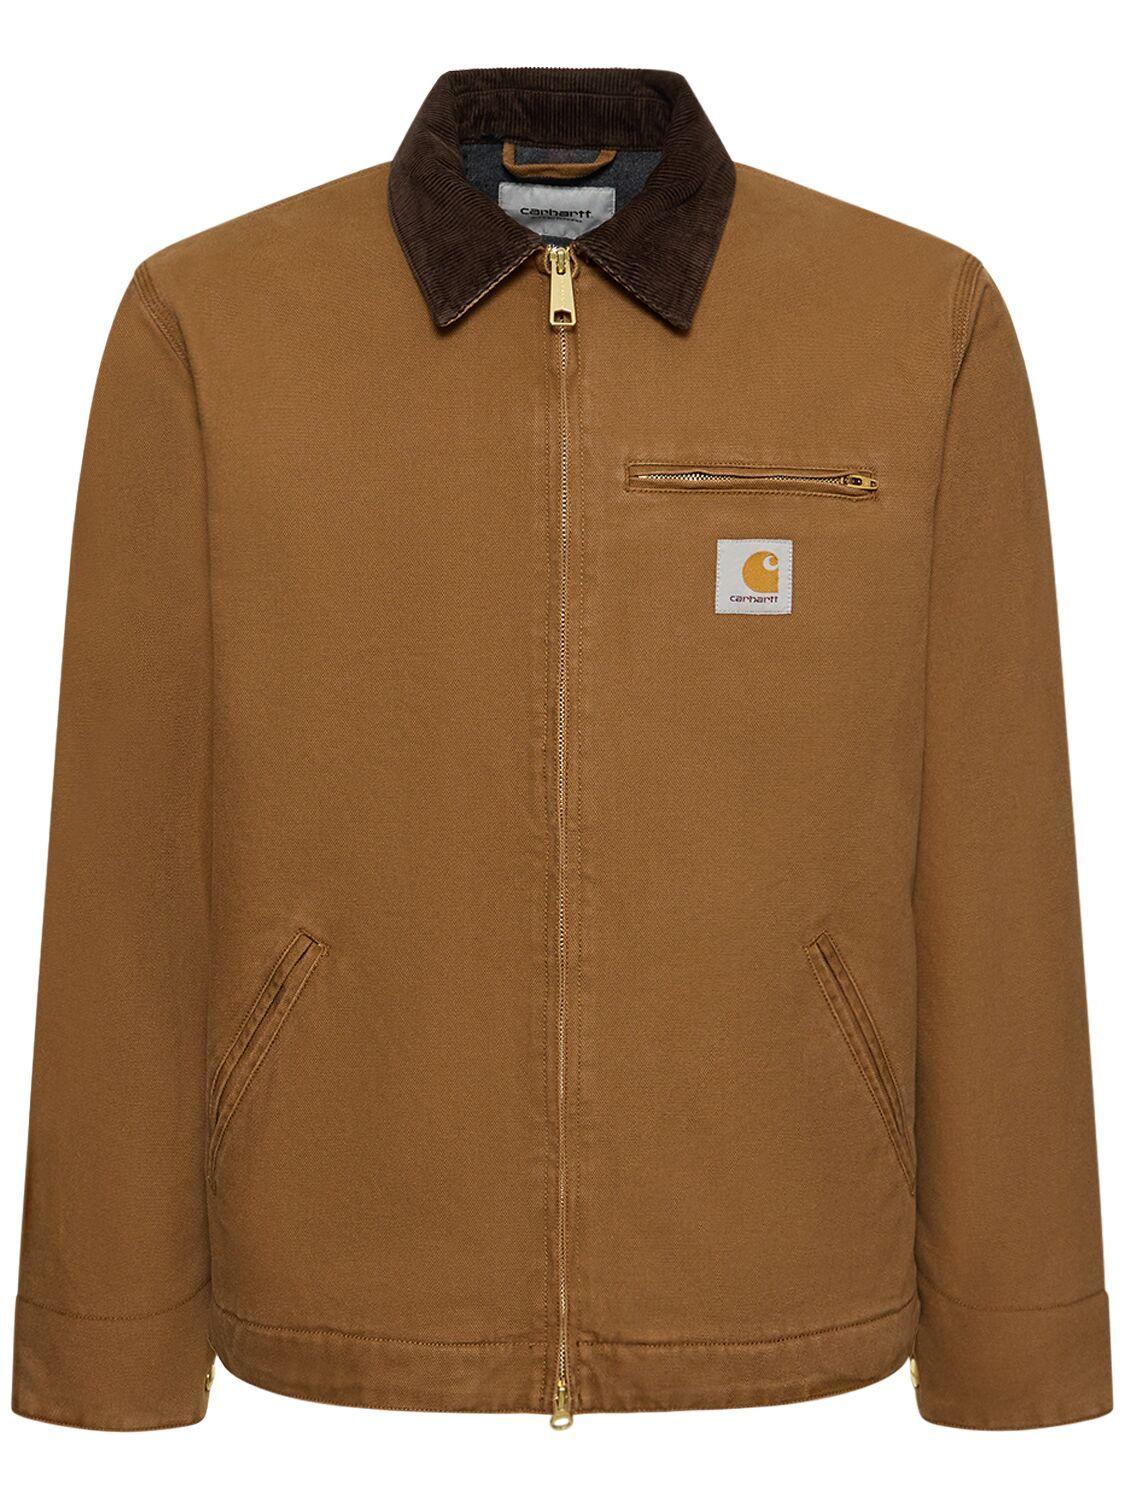 Carhartt WIP Detroit Stonewashed Poly Blend Jacket in Brown for Men | Lyst